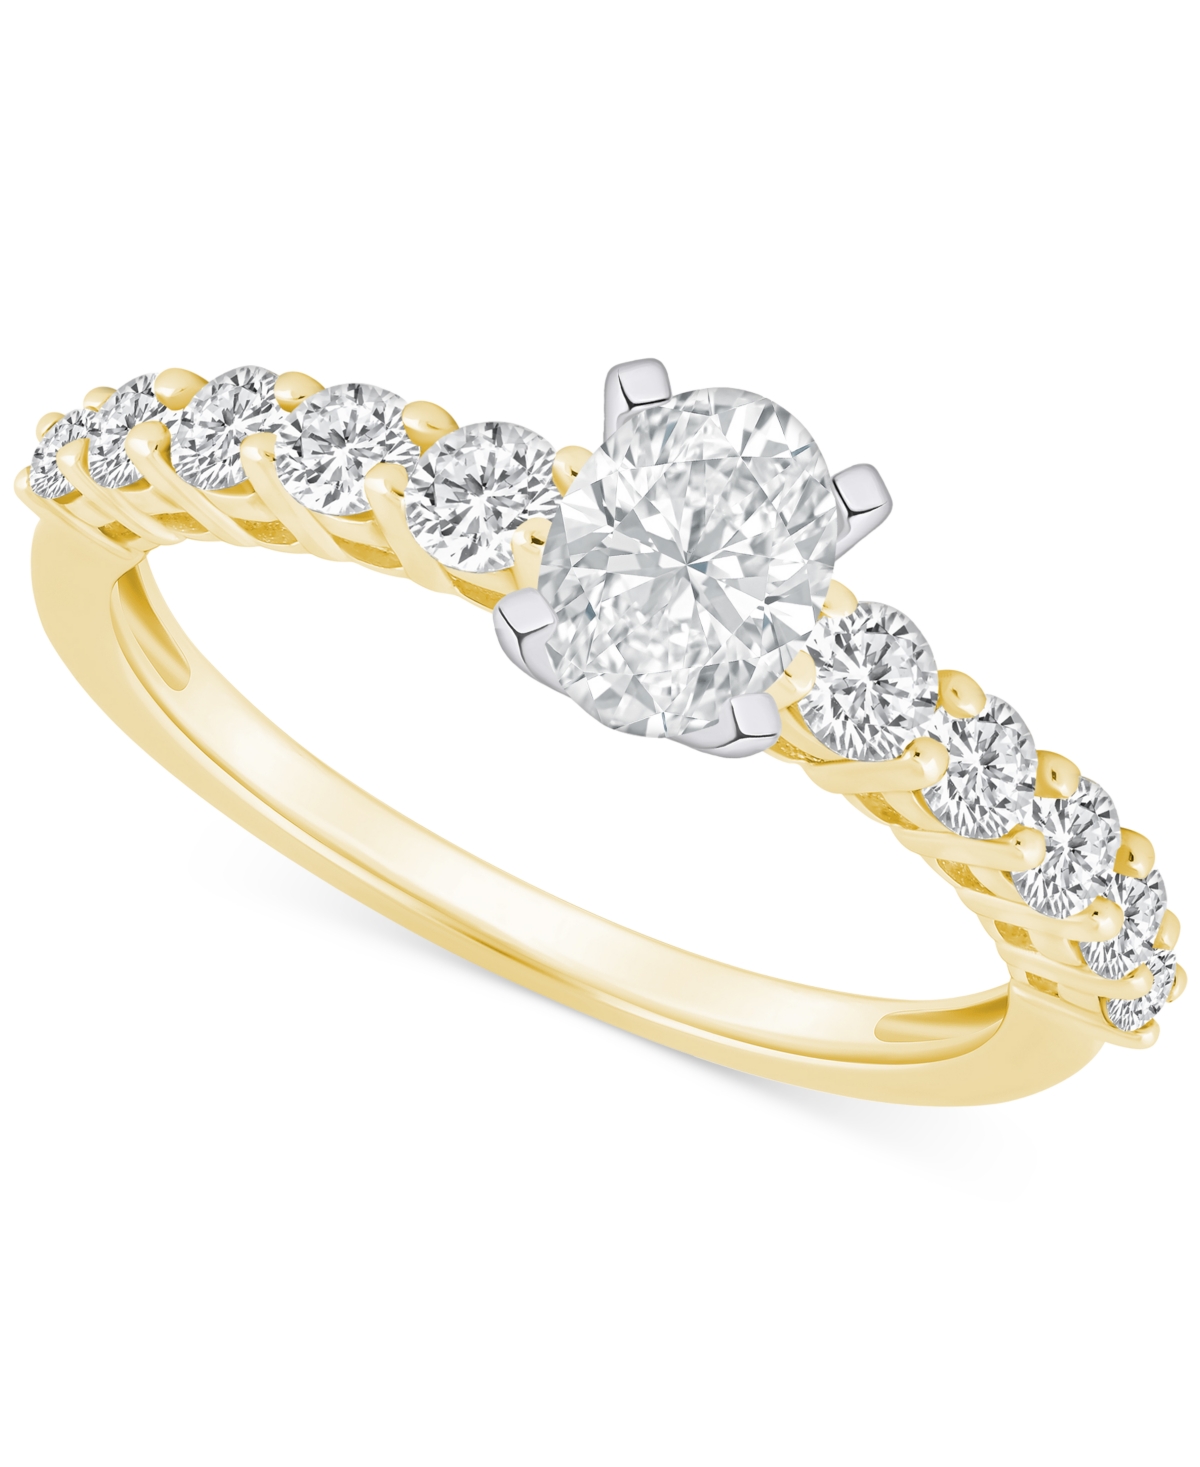 Diamond Oval Engagement Ring (1 ct. t.w.) in 14k Gold - White Gold